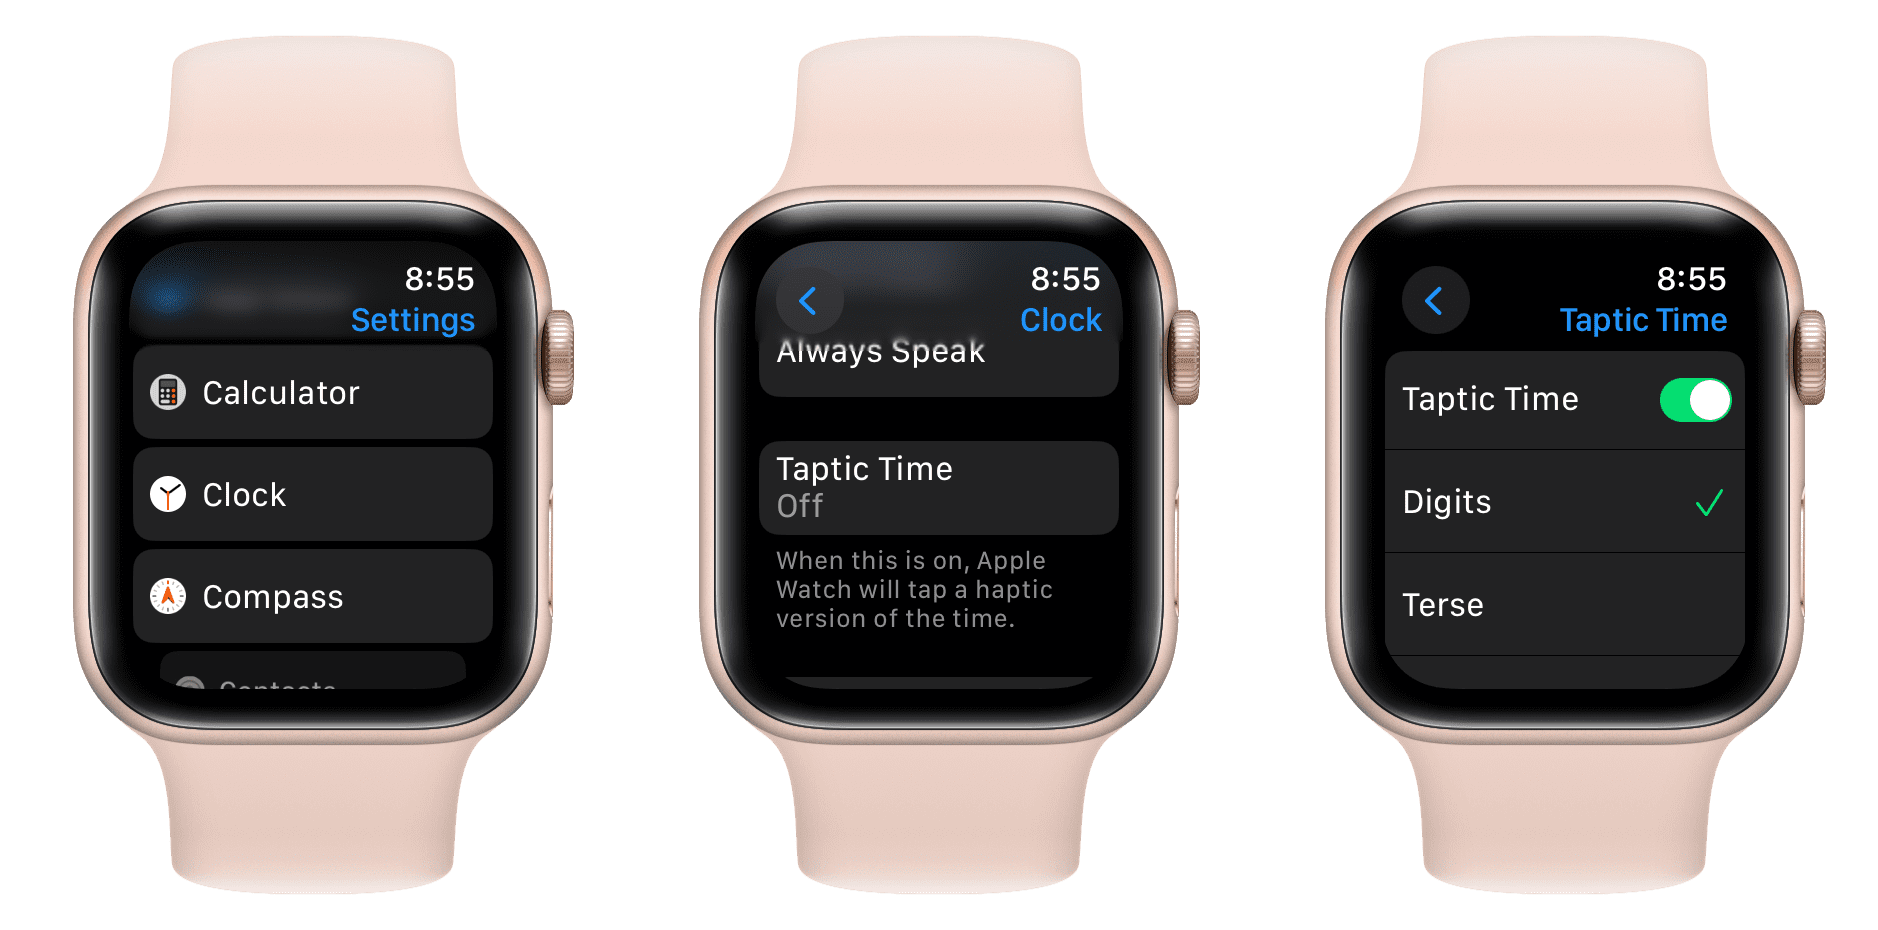 Taptic Time in Clock settings on Apple Watch